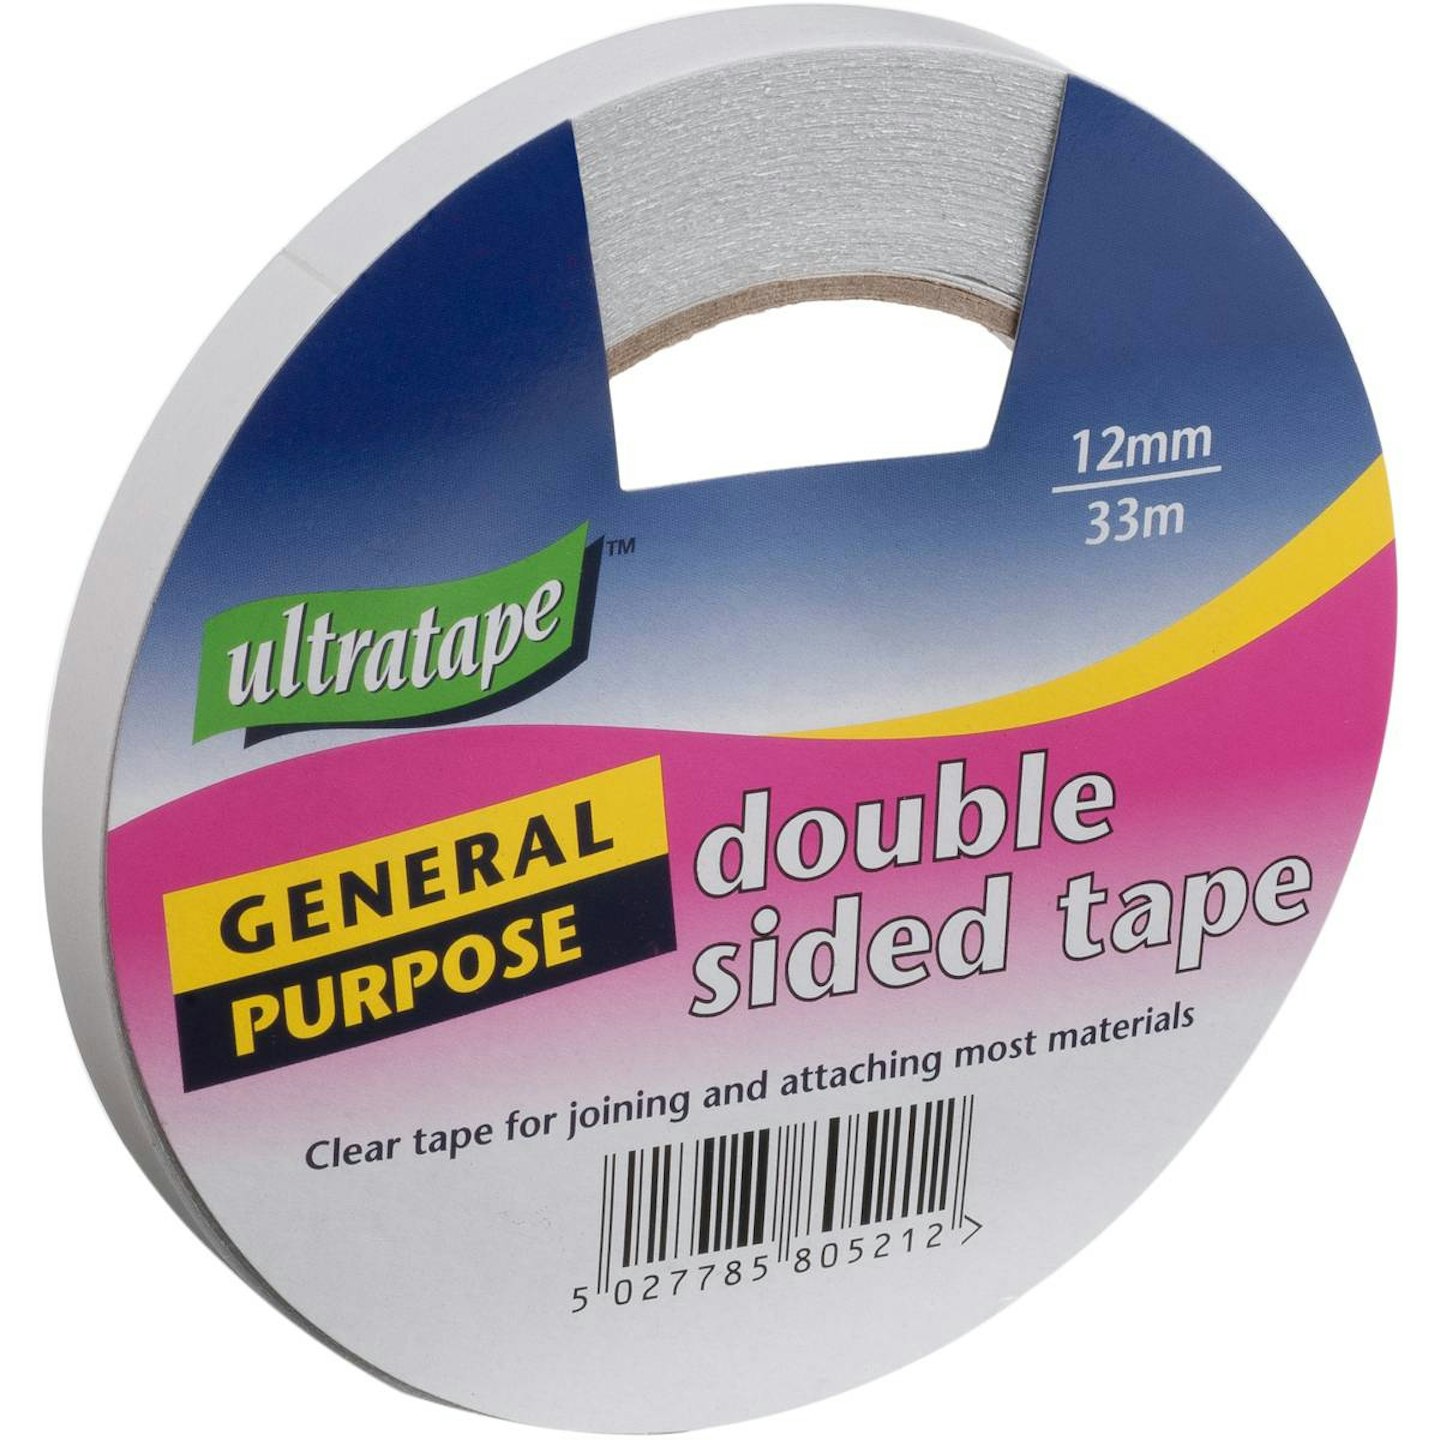 Ultratape General Purpose Double Sided Sticky Tape 12mm x 33m